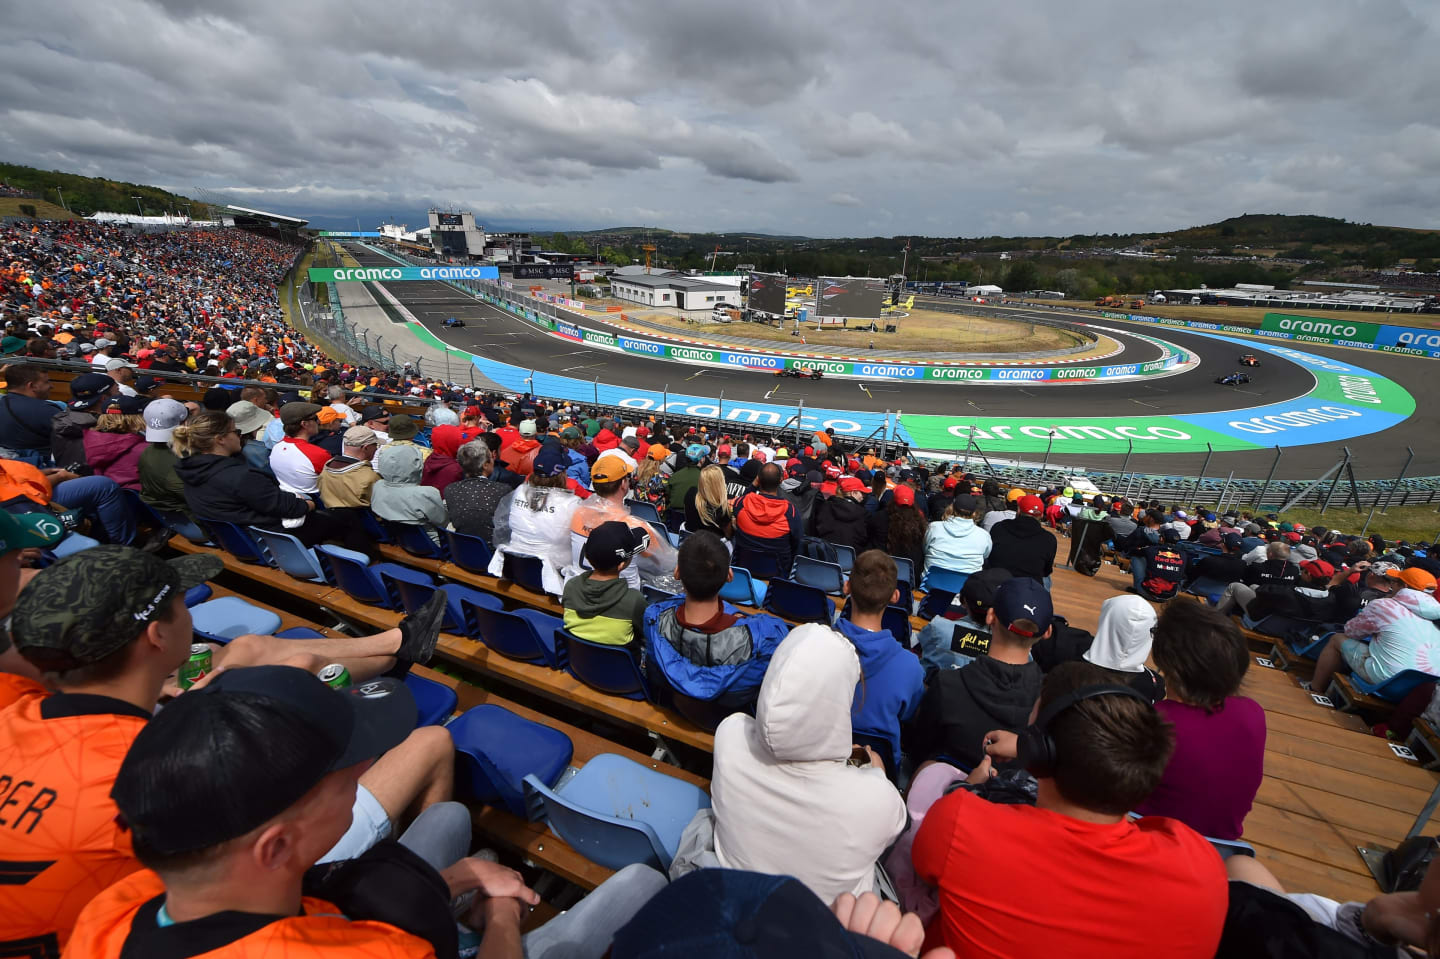 A general view shows spectators on the stands as they wait for the start of the Formula One Hungarian Grand Prix at the Hungaroring in Mogyorod near Budapest, Hungary, on July 31, 2022. (Photo by Ferenc ISZA / AFP) (Photo by FERENC ISZA/AFP via Getty Images)